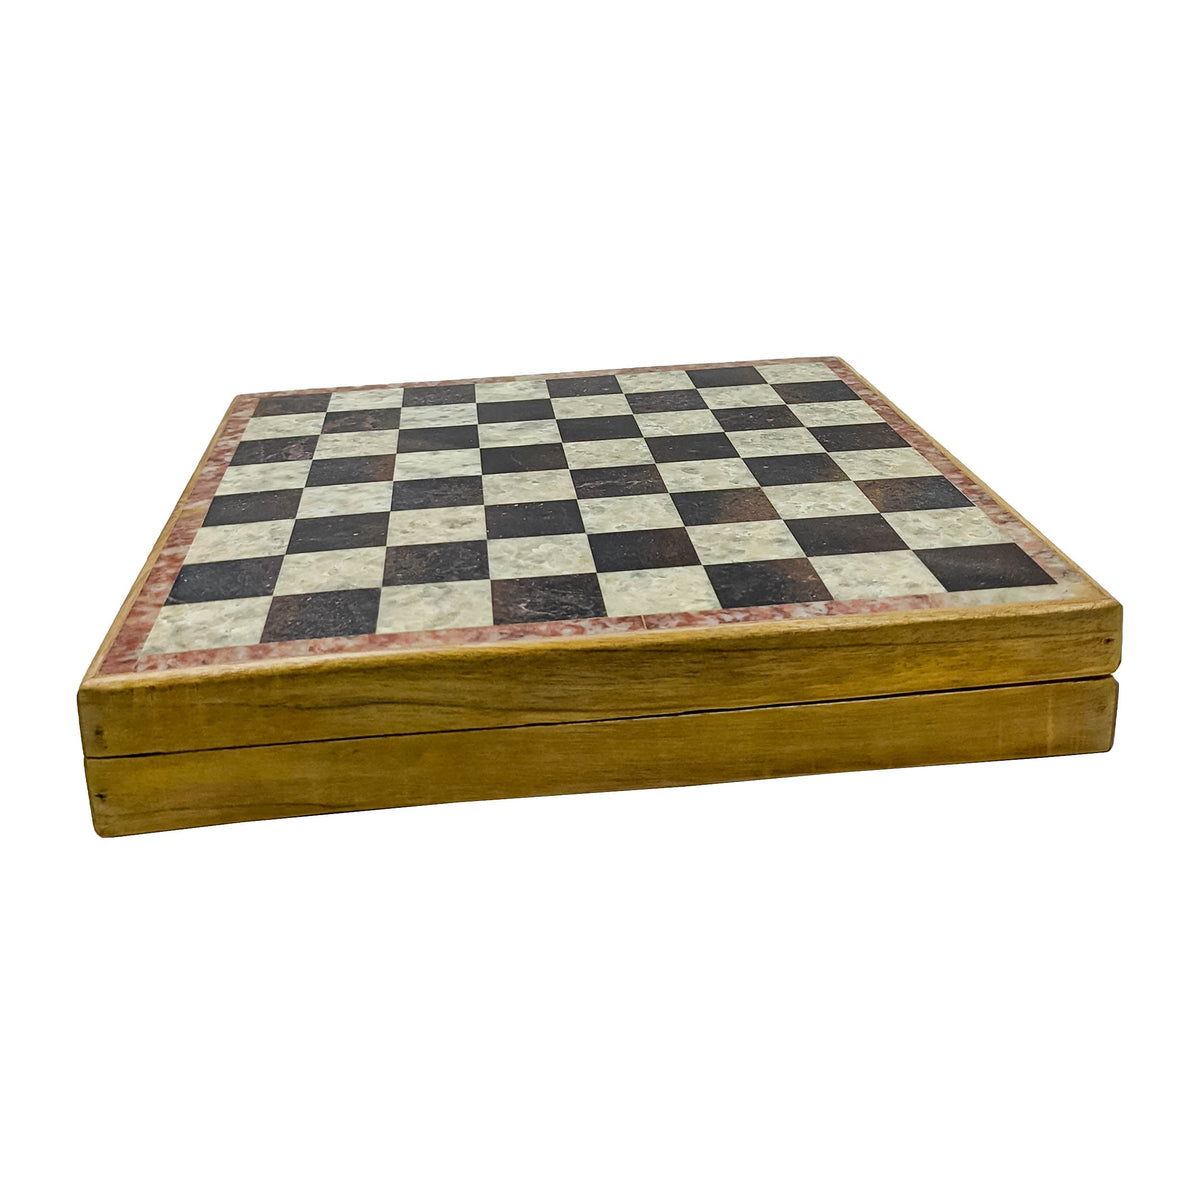 Play Chess in Style with Handmade Folding Wooden Bone Chess Board